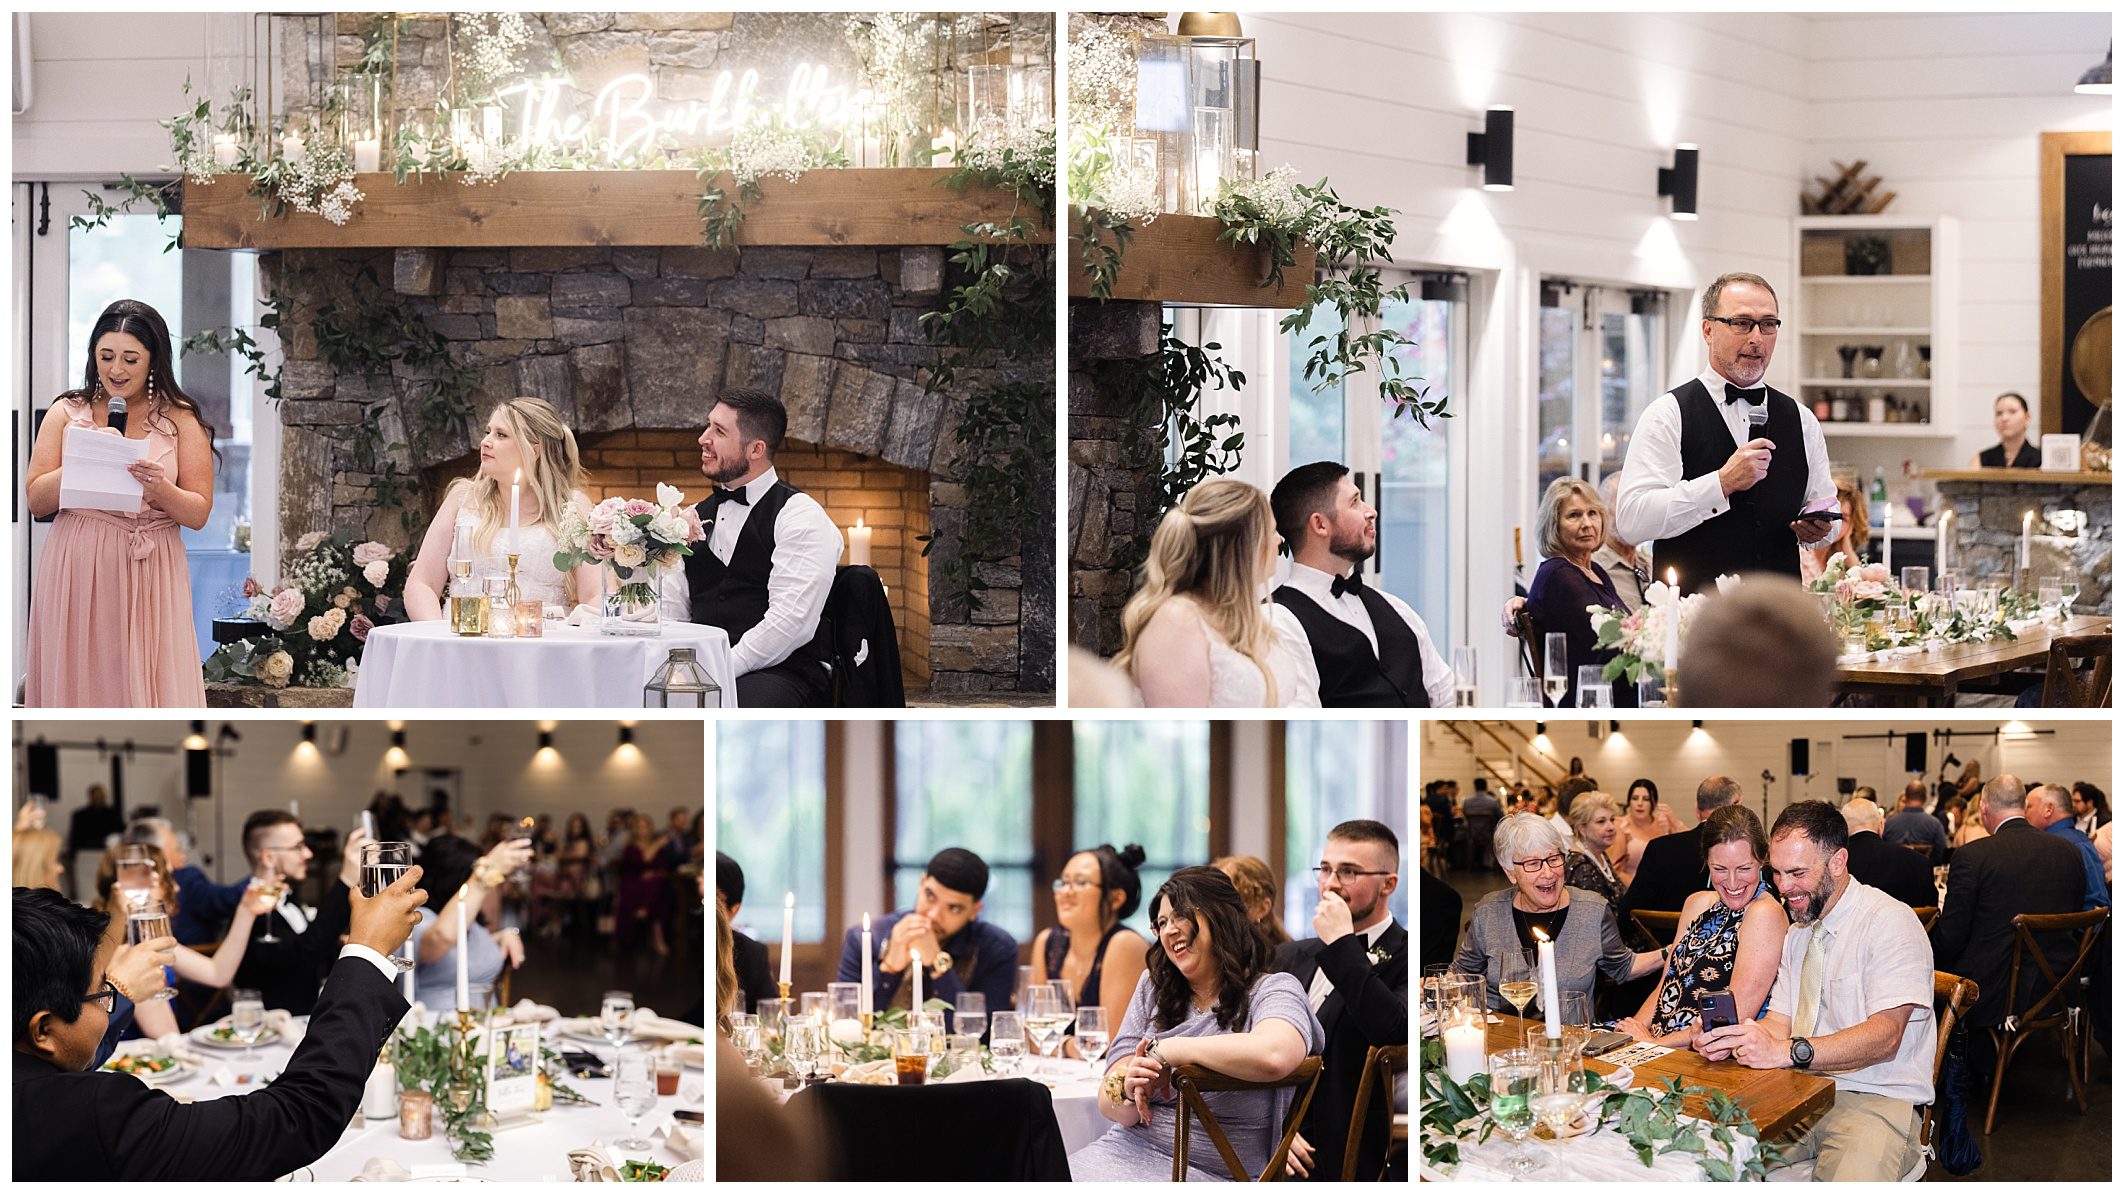 Collage of mountain wedding reception scenes at Chestnut Ridge, including speeches at a head table, guests dining, and people toasting at a well-decorated venue.